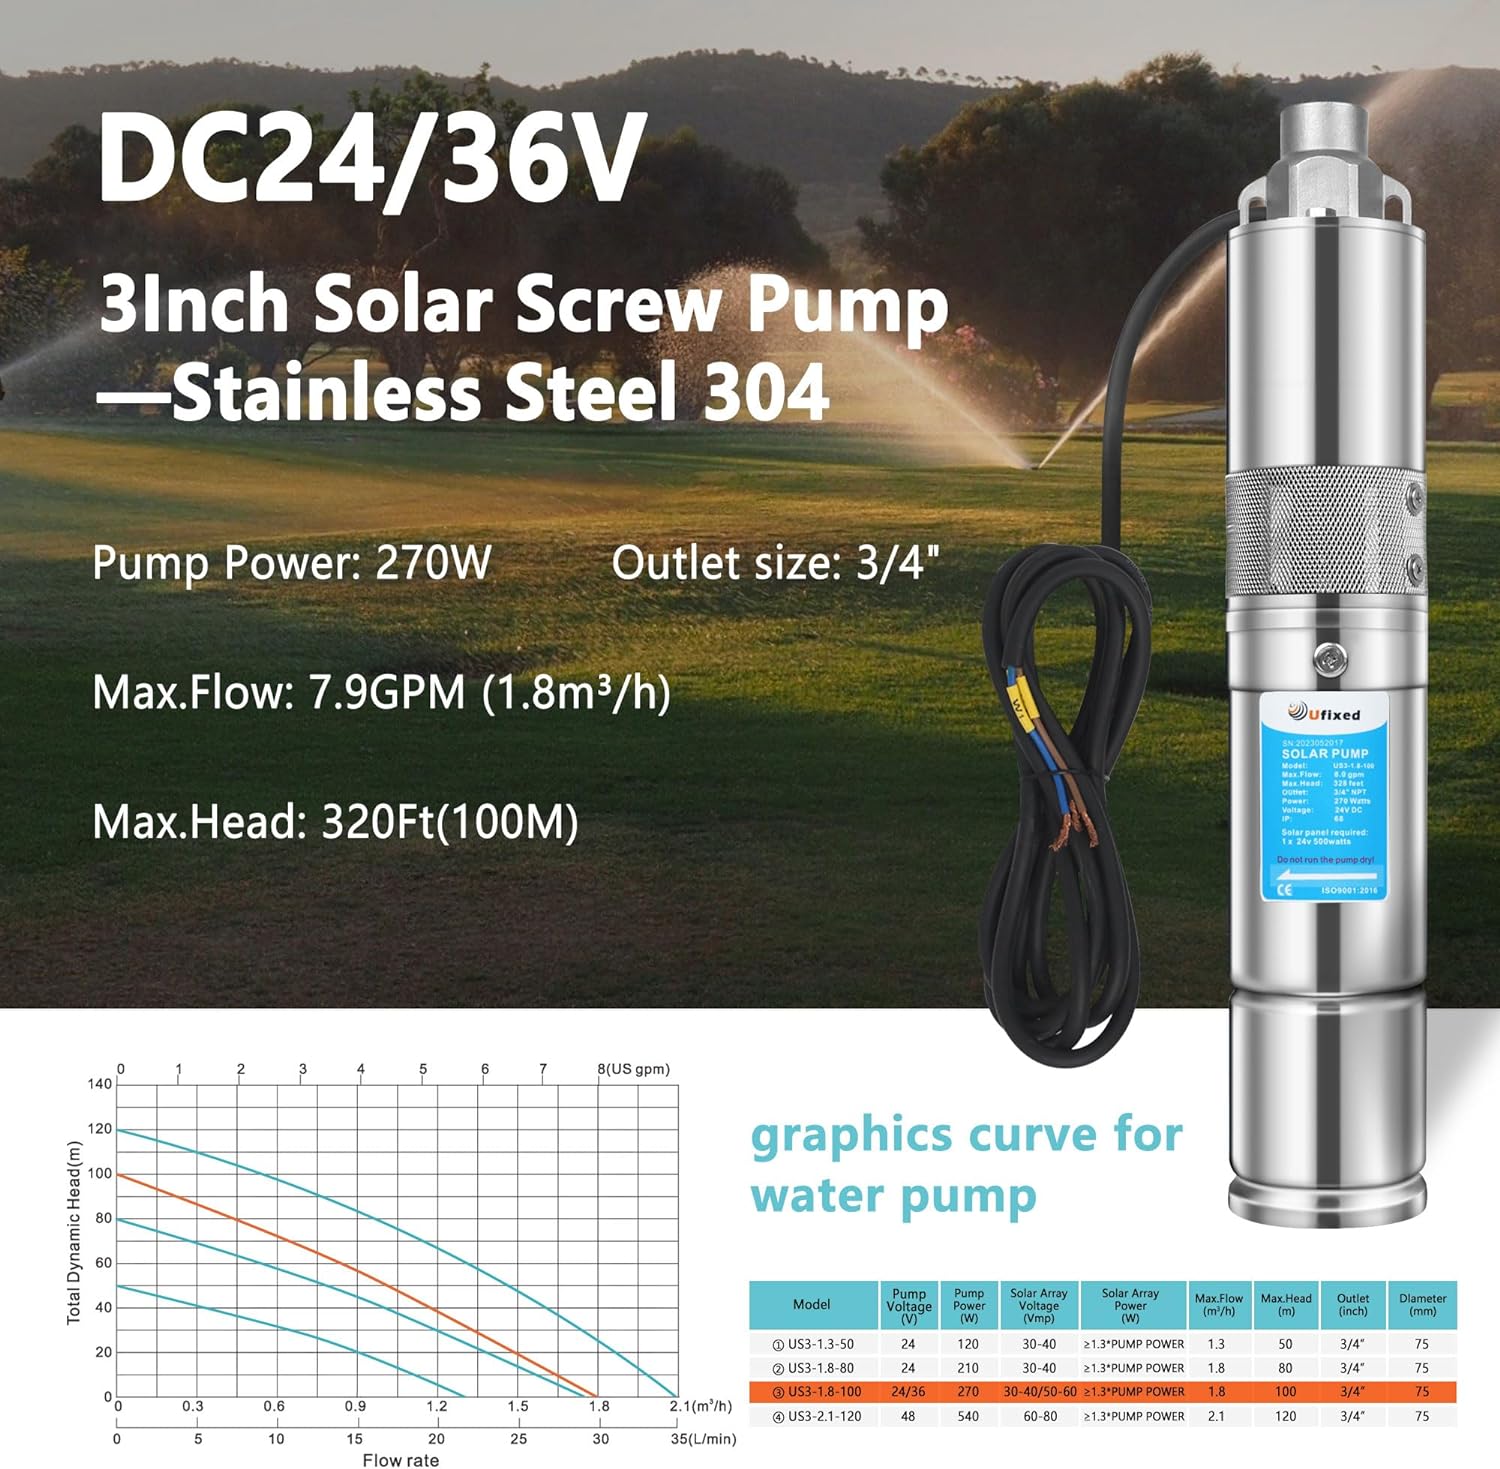 3 od solar well pump with mppt controller 24v water pump 79gpm 320ft head 34 outlet 270w power stainless steel solar wat 2